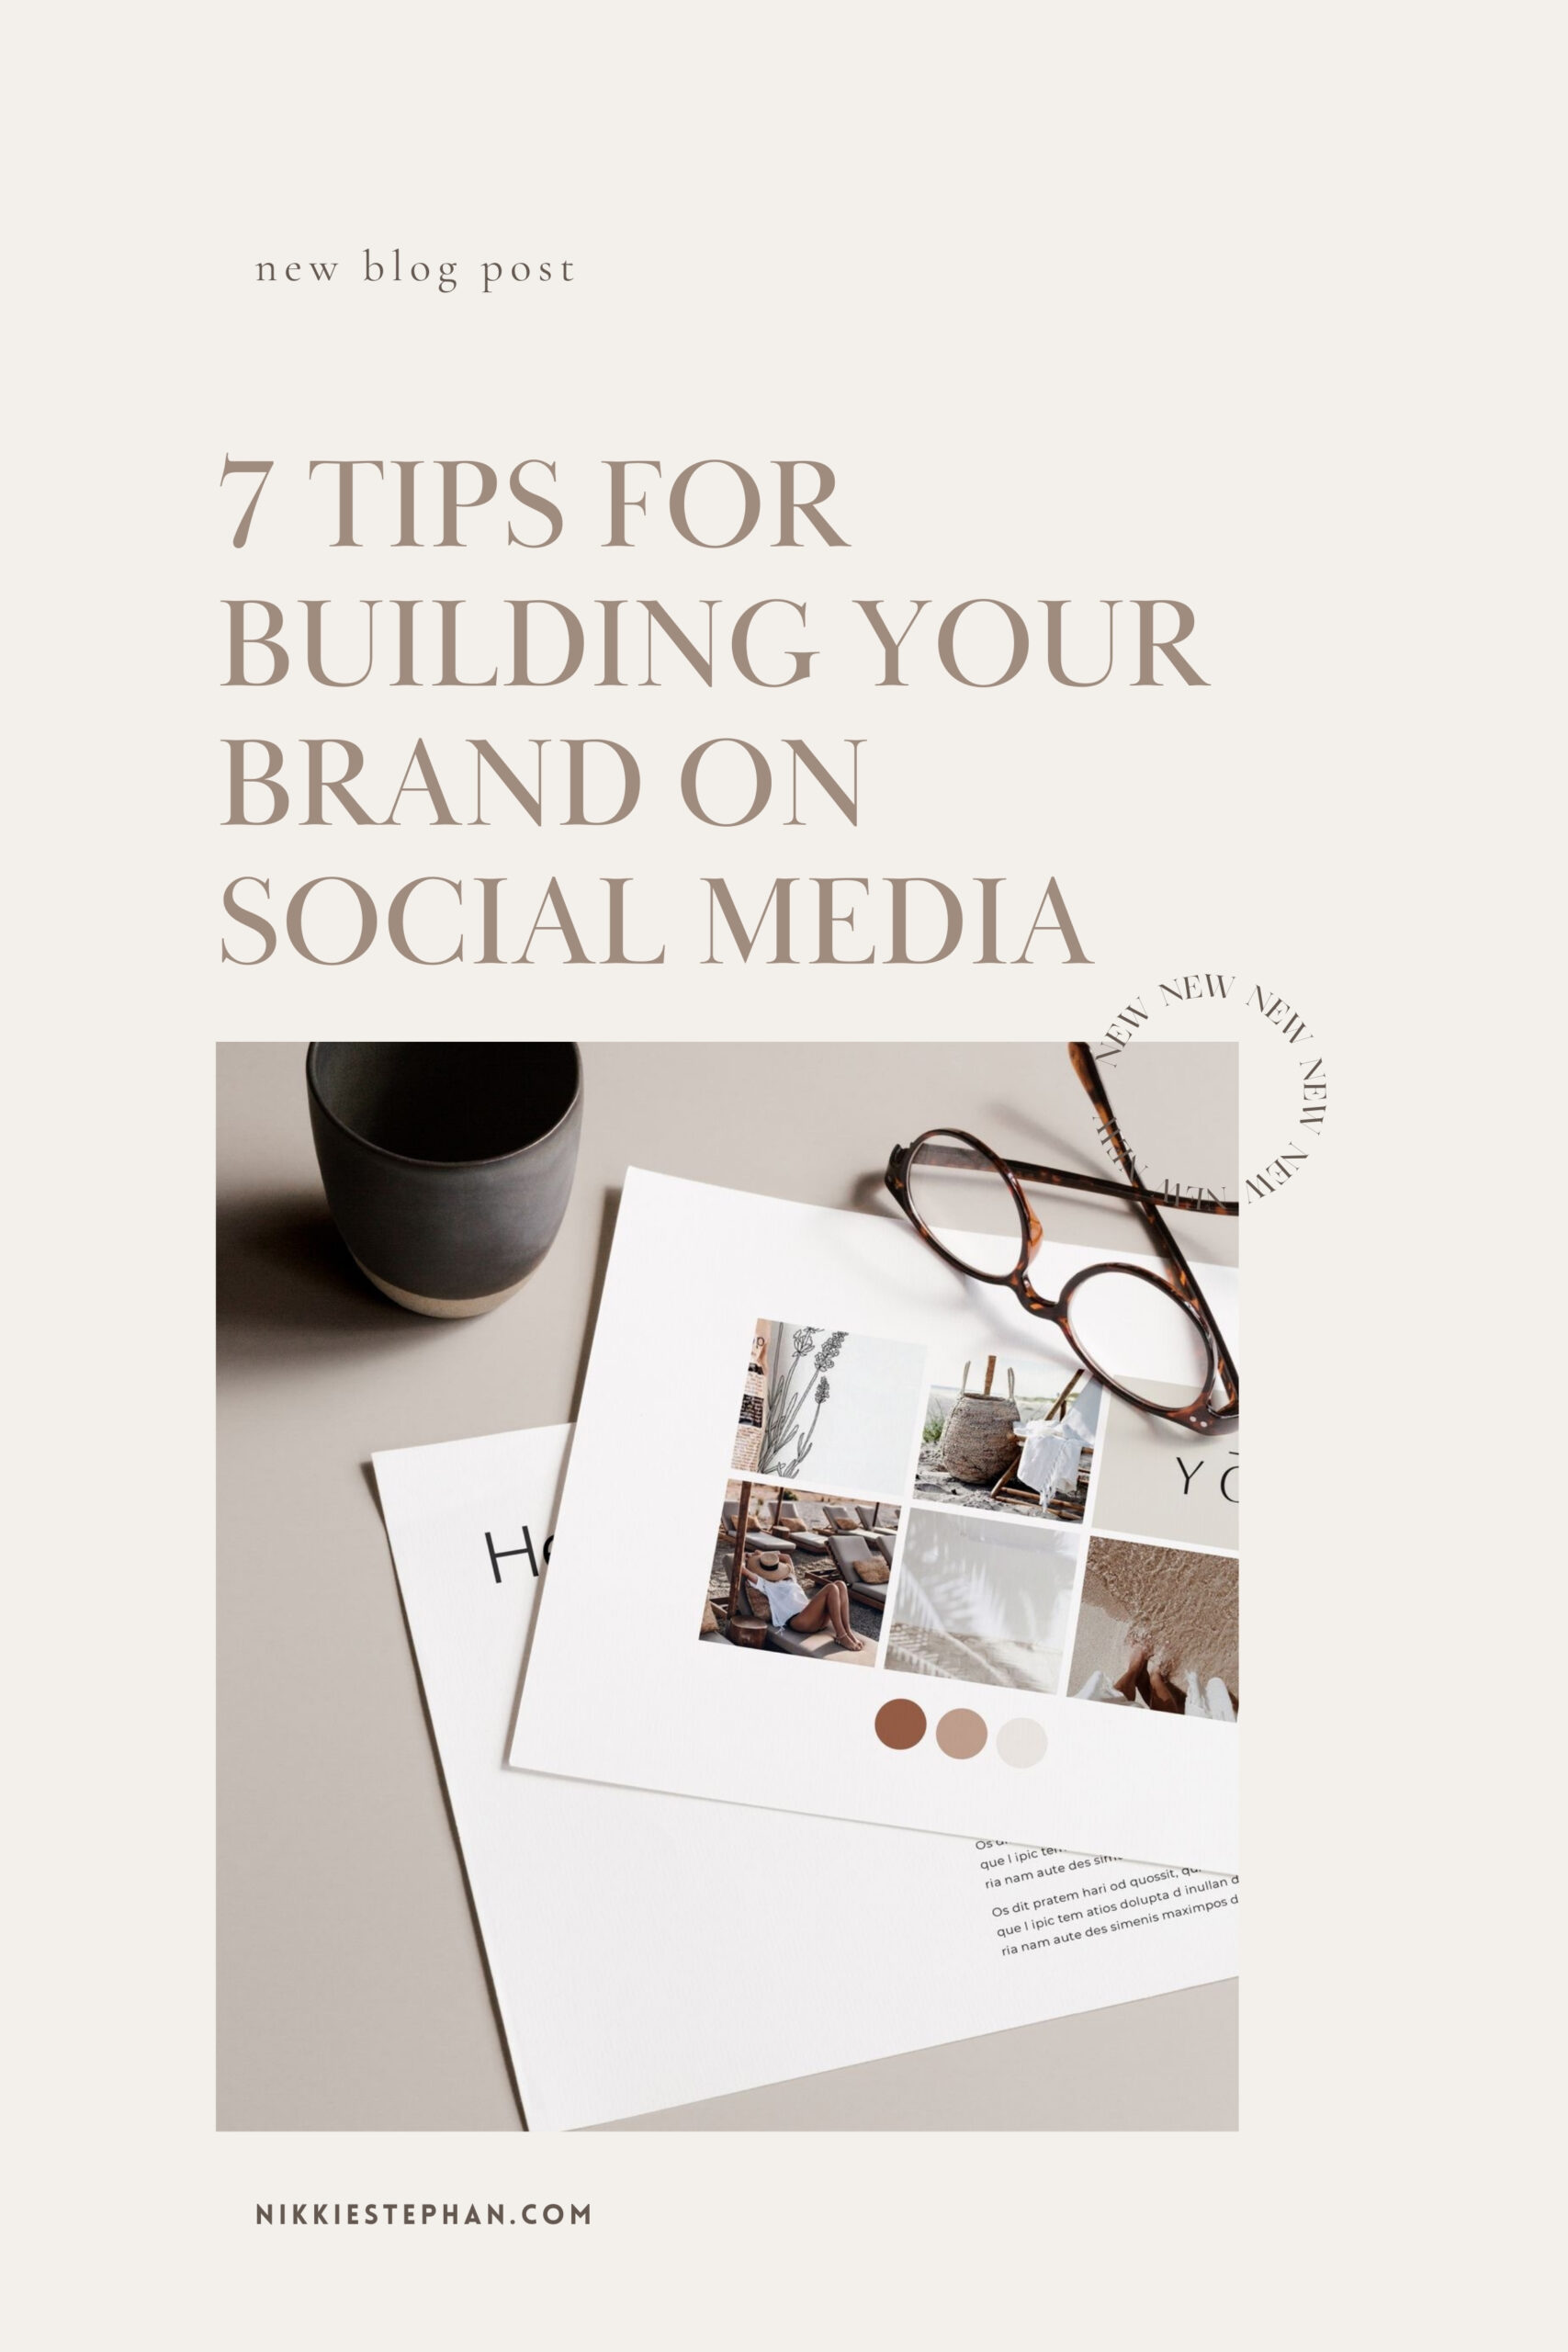 7 Tips for Building Your Brand on Social Media